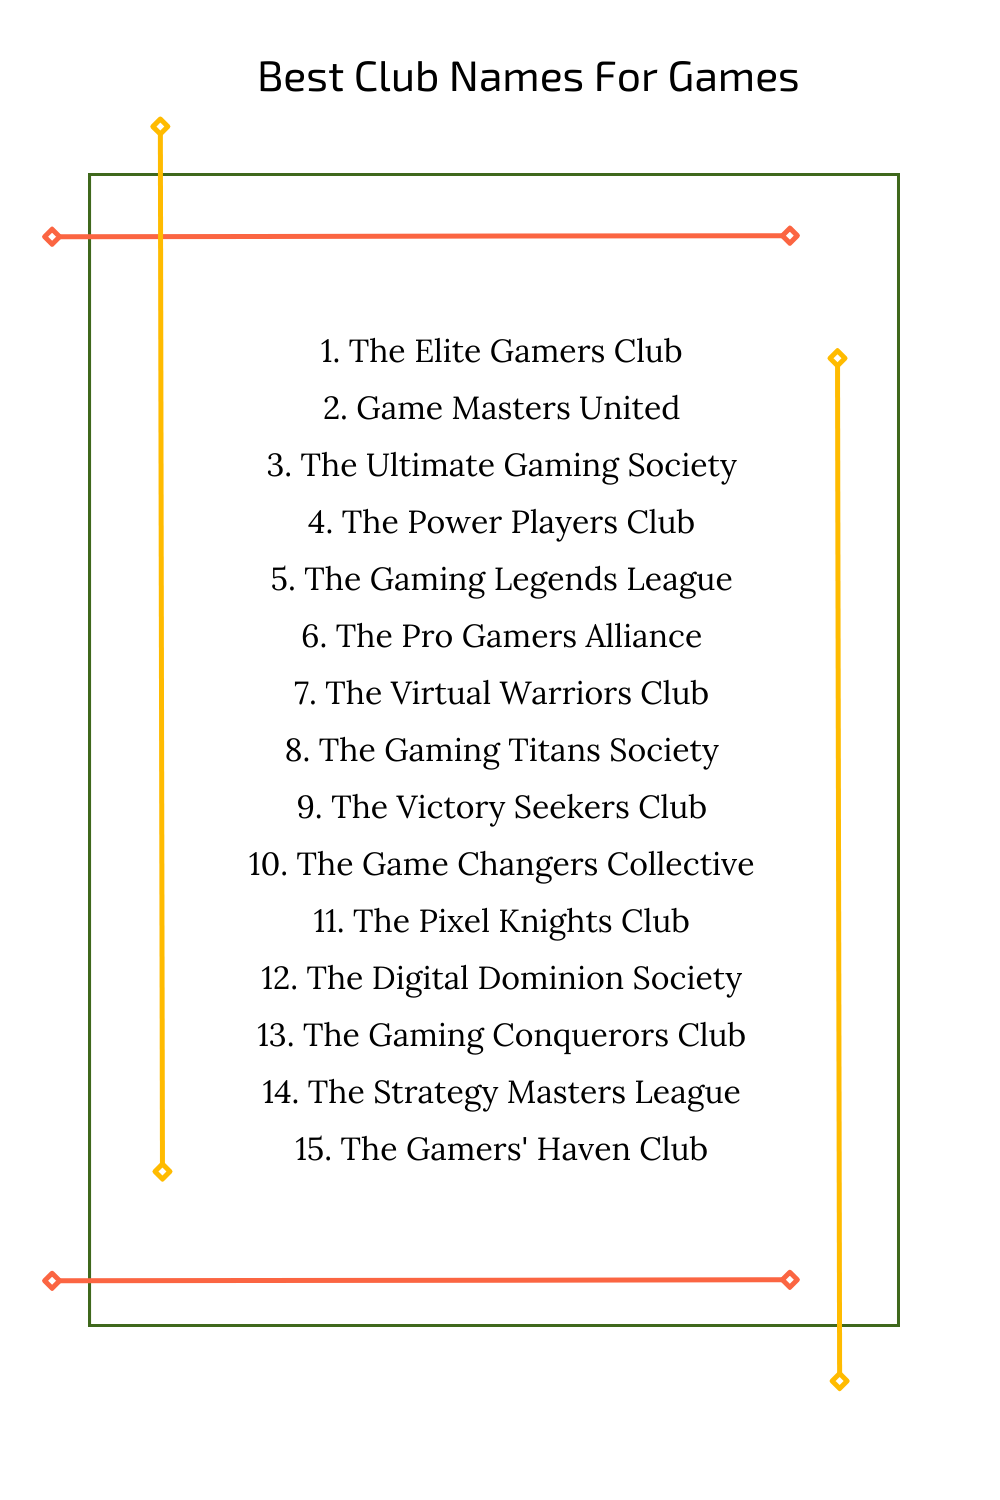 Best Club Names For Games